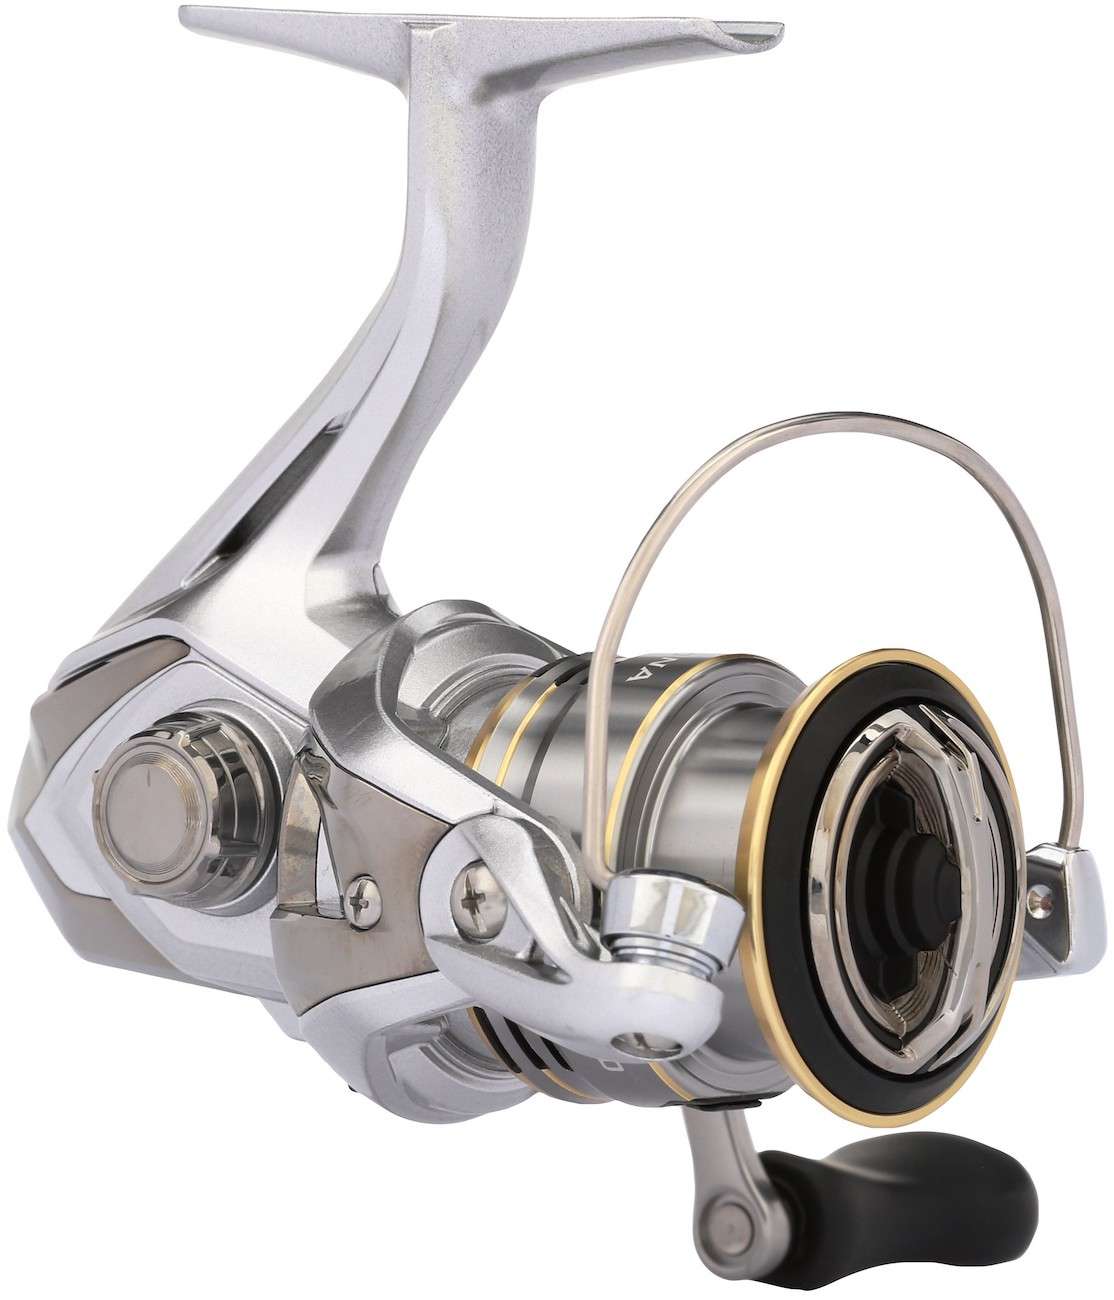 Why I Think the Shimano Spirex RG is the Best Spinning Reel